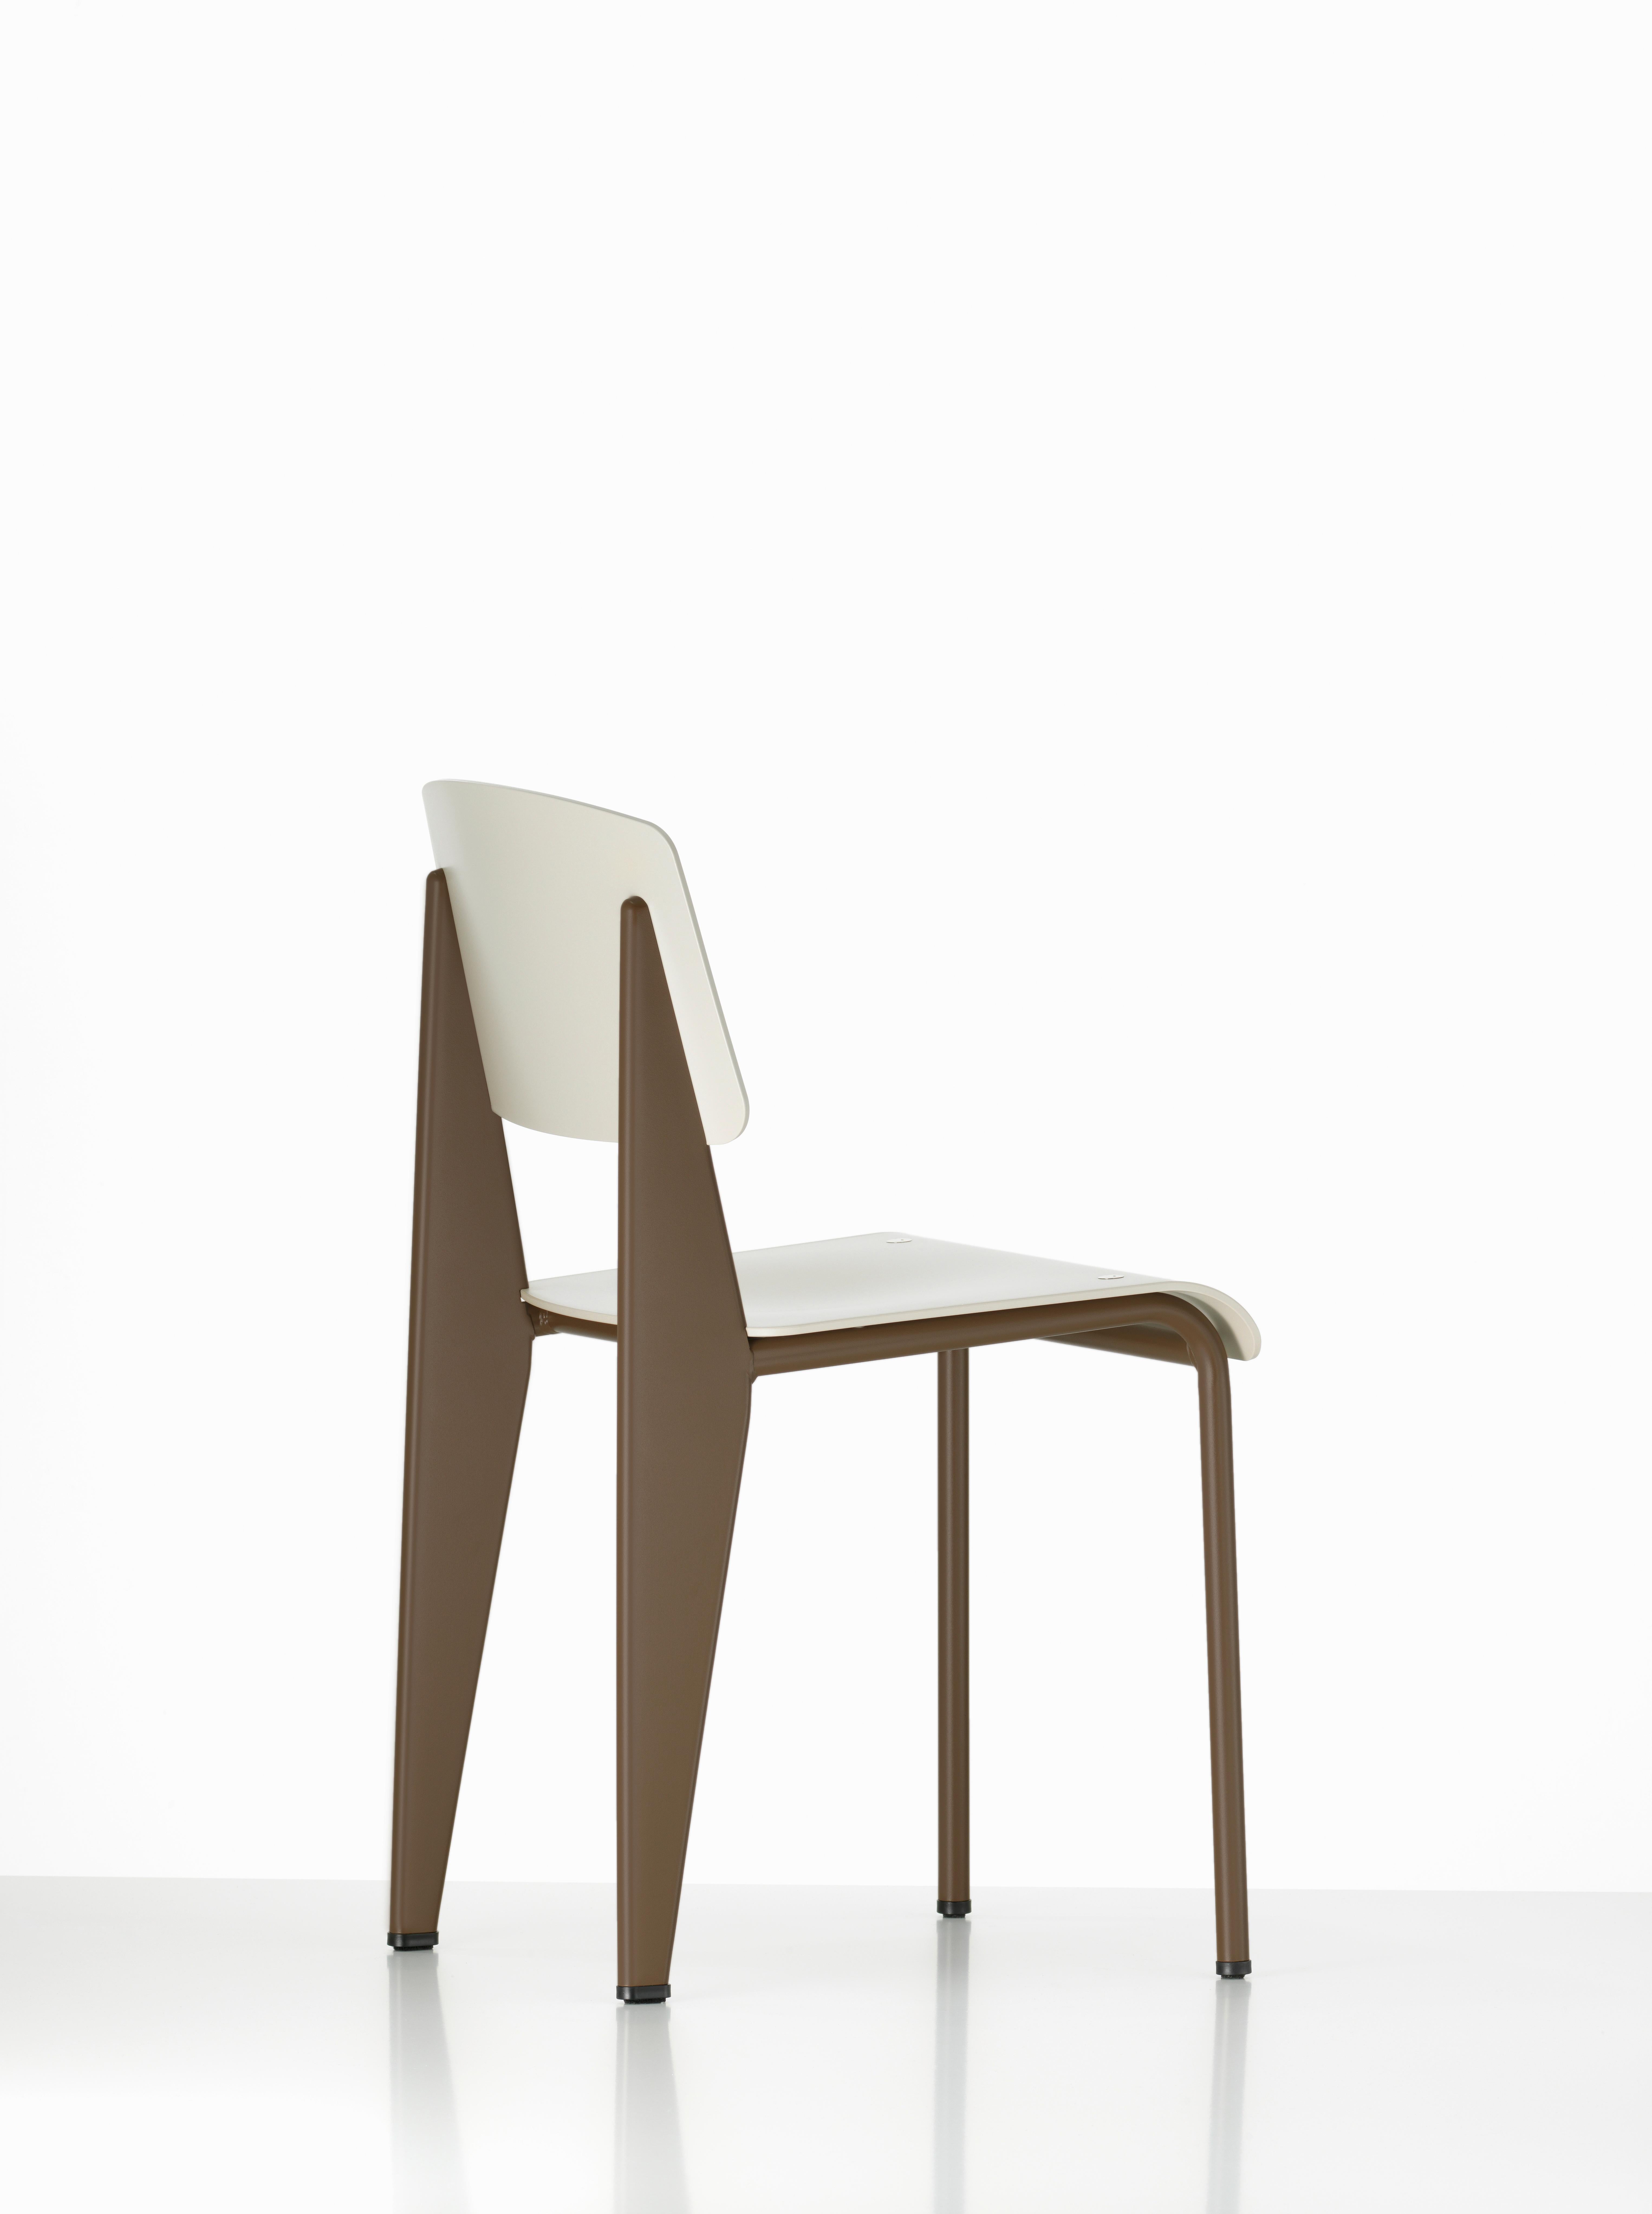 Jean Prouvé Standard Chair SP in Olive and Ecru White for Vitra 11